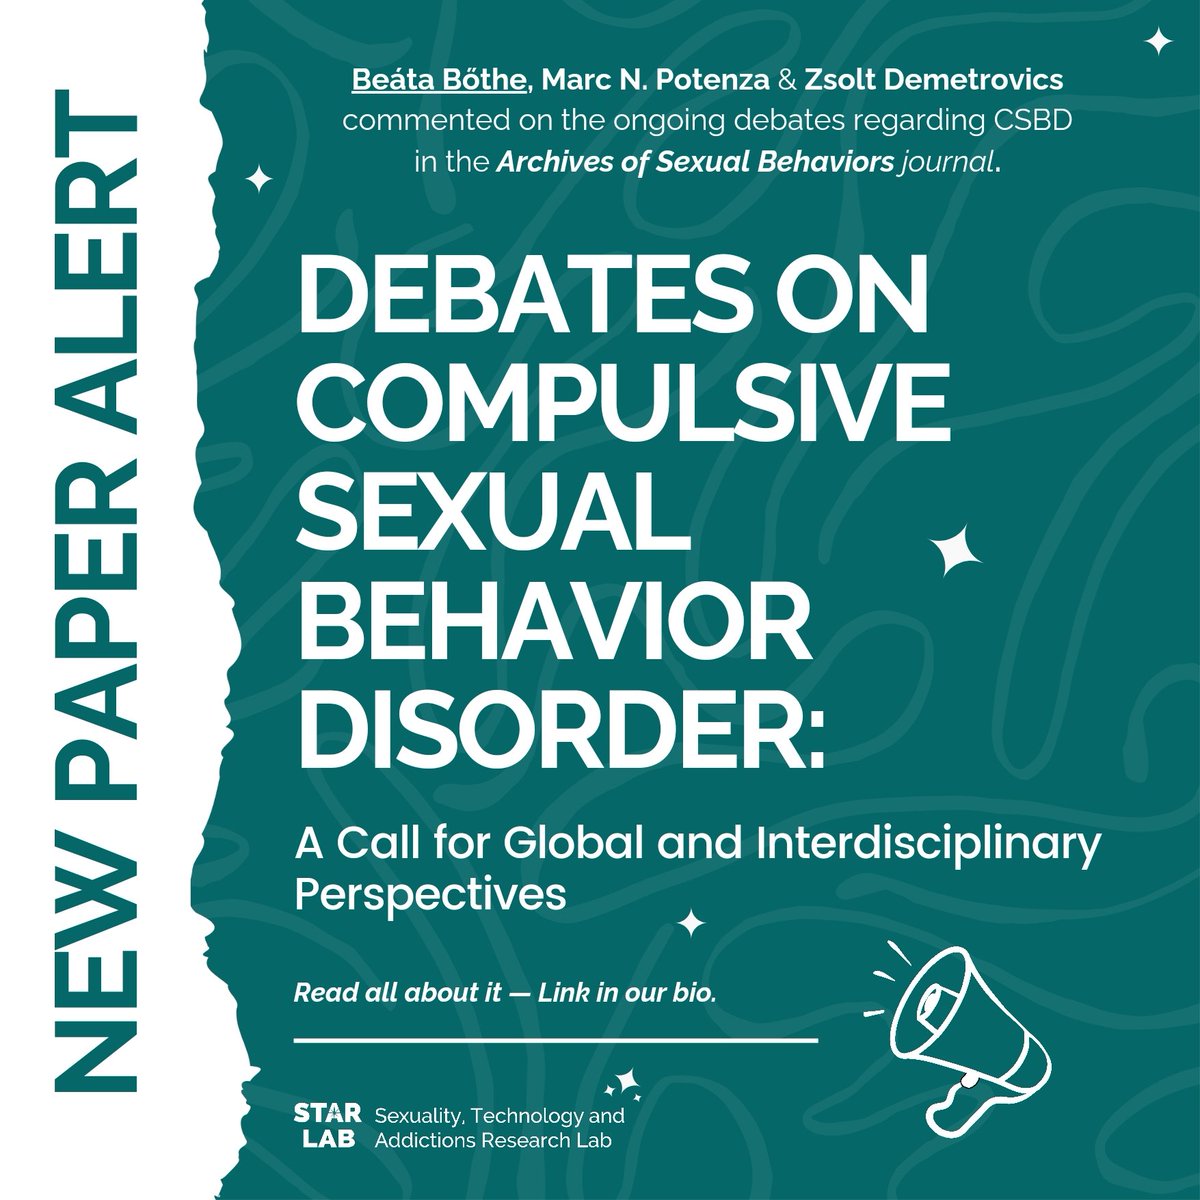 🌍🧠 New commentary paper alert! Dive into this insightful piece on Compulsive Sexual Behavior Disorder and its calls for an interdisciplinary approach. Check out the latest research by @beabothe, Dr. Potenza , and @Demetrovics: [Link in bio]. #Research #SexualHealth 🌐🔍